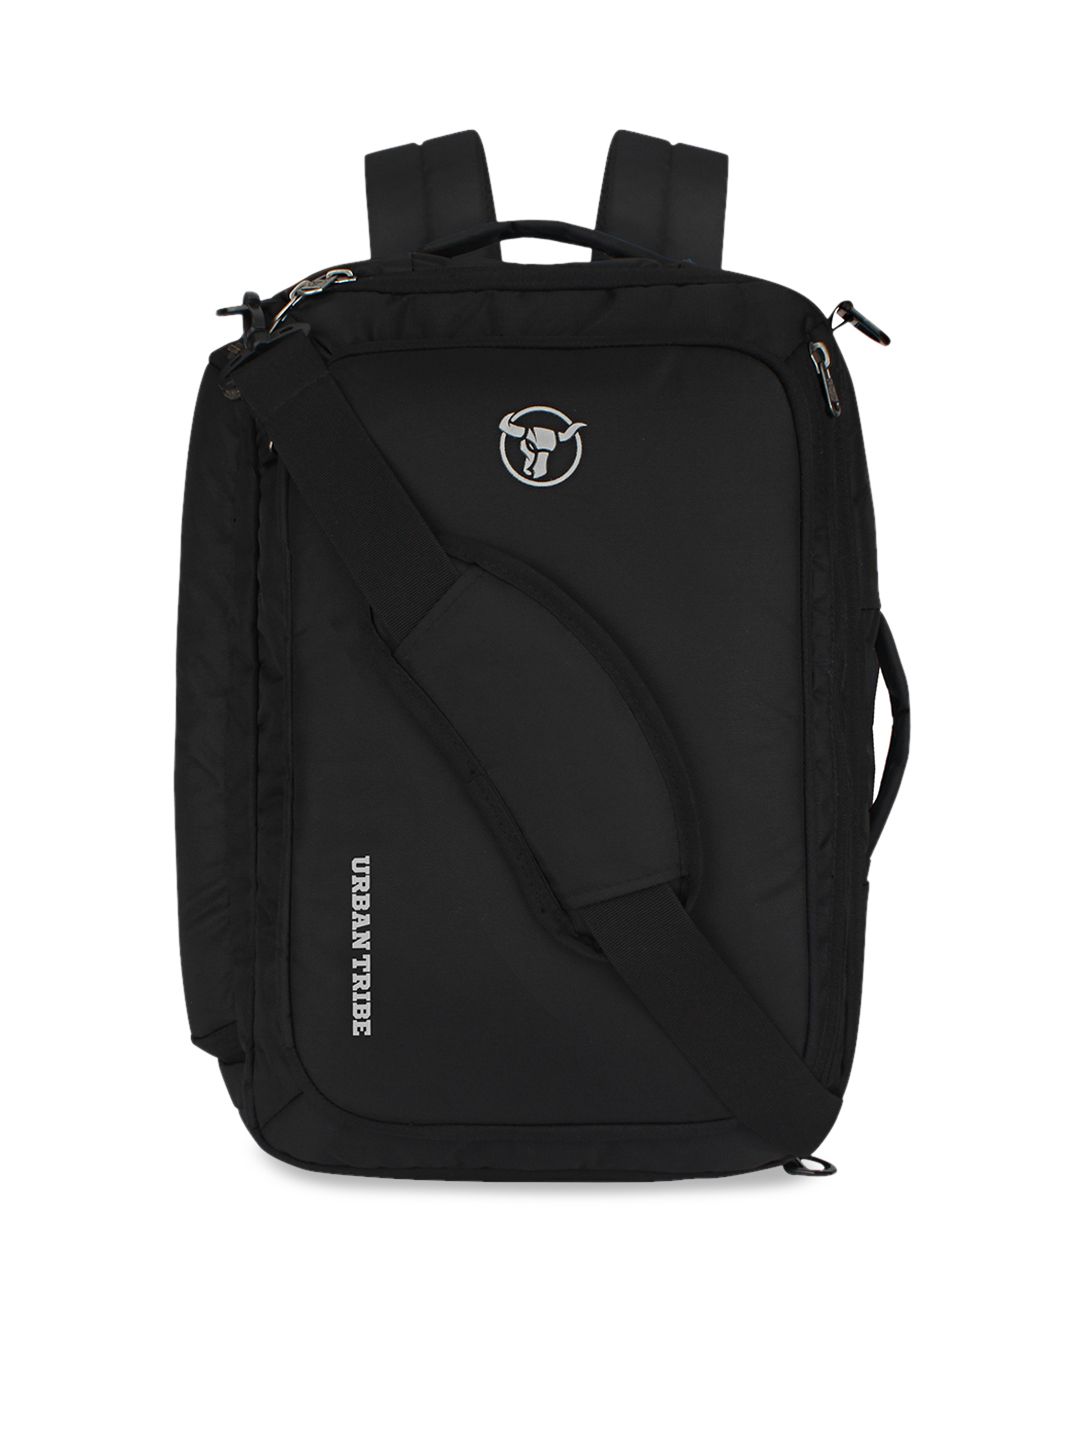 URBAN TRIBE Unisex Black Solid Backpack Price in India